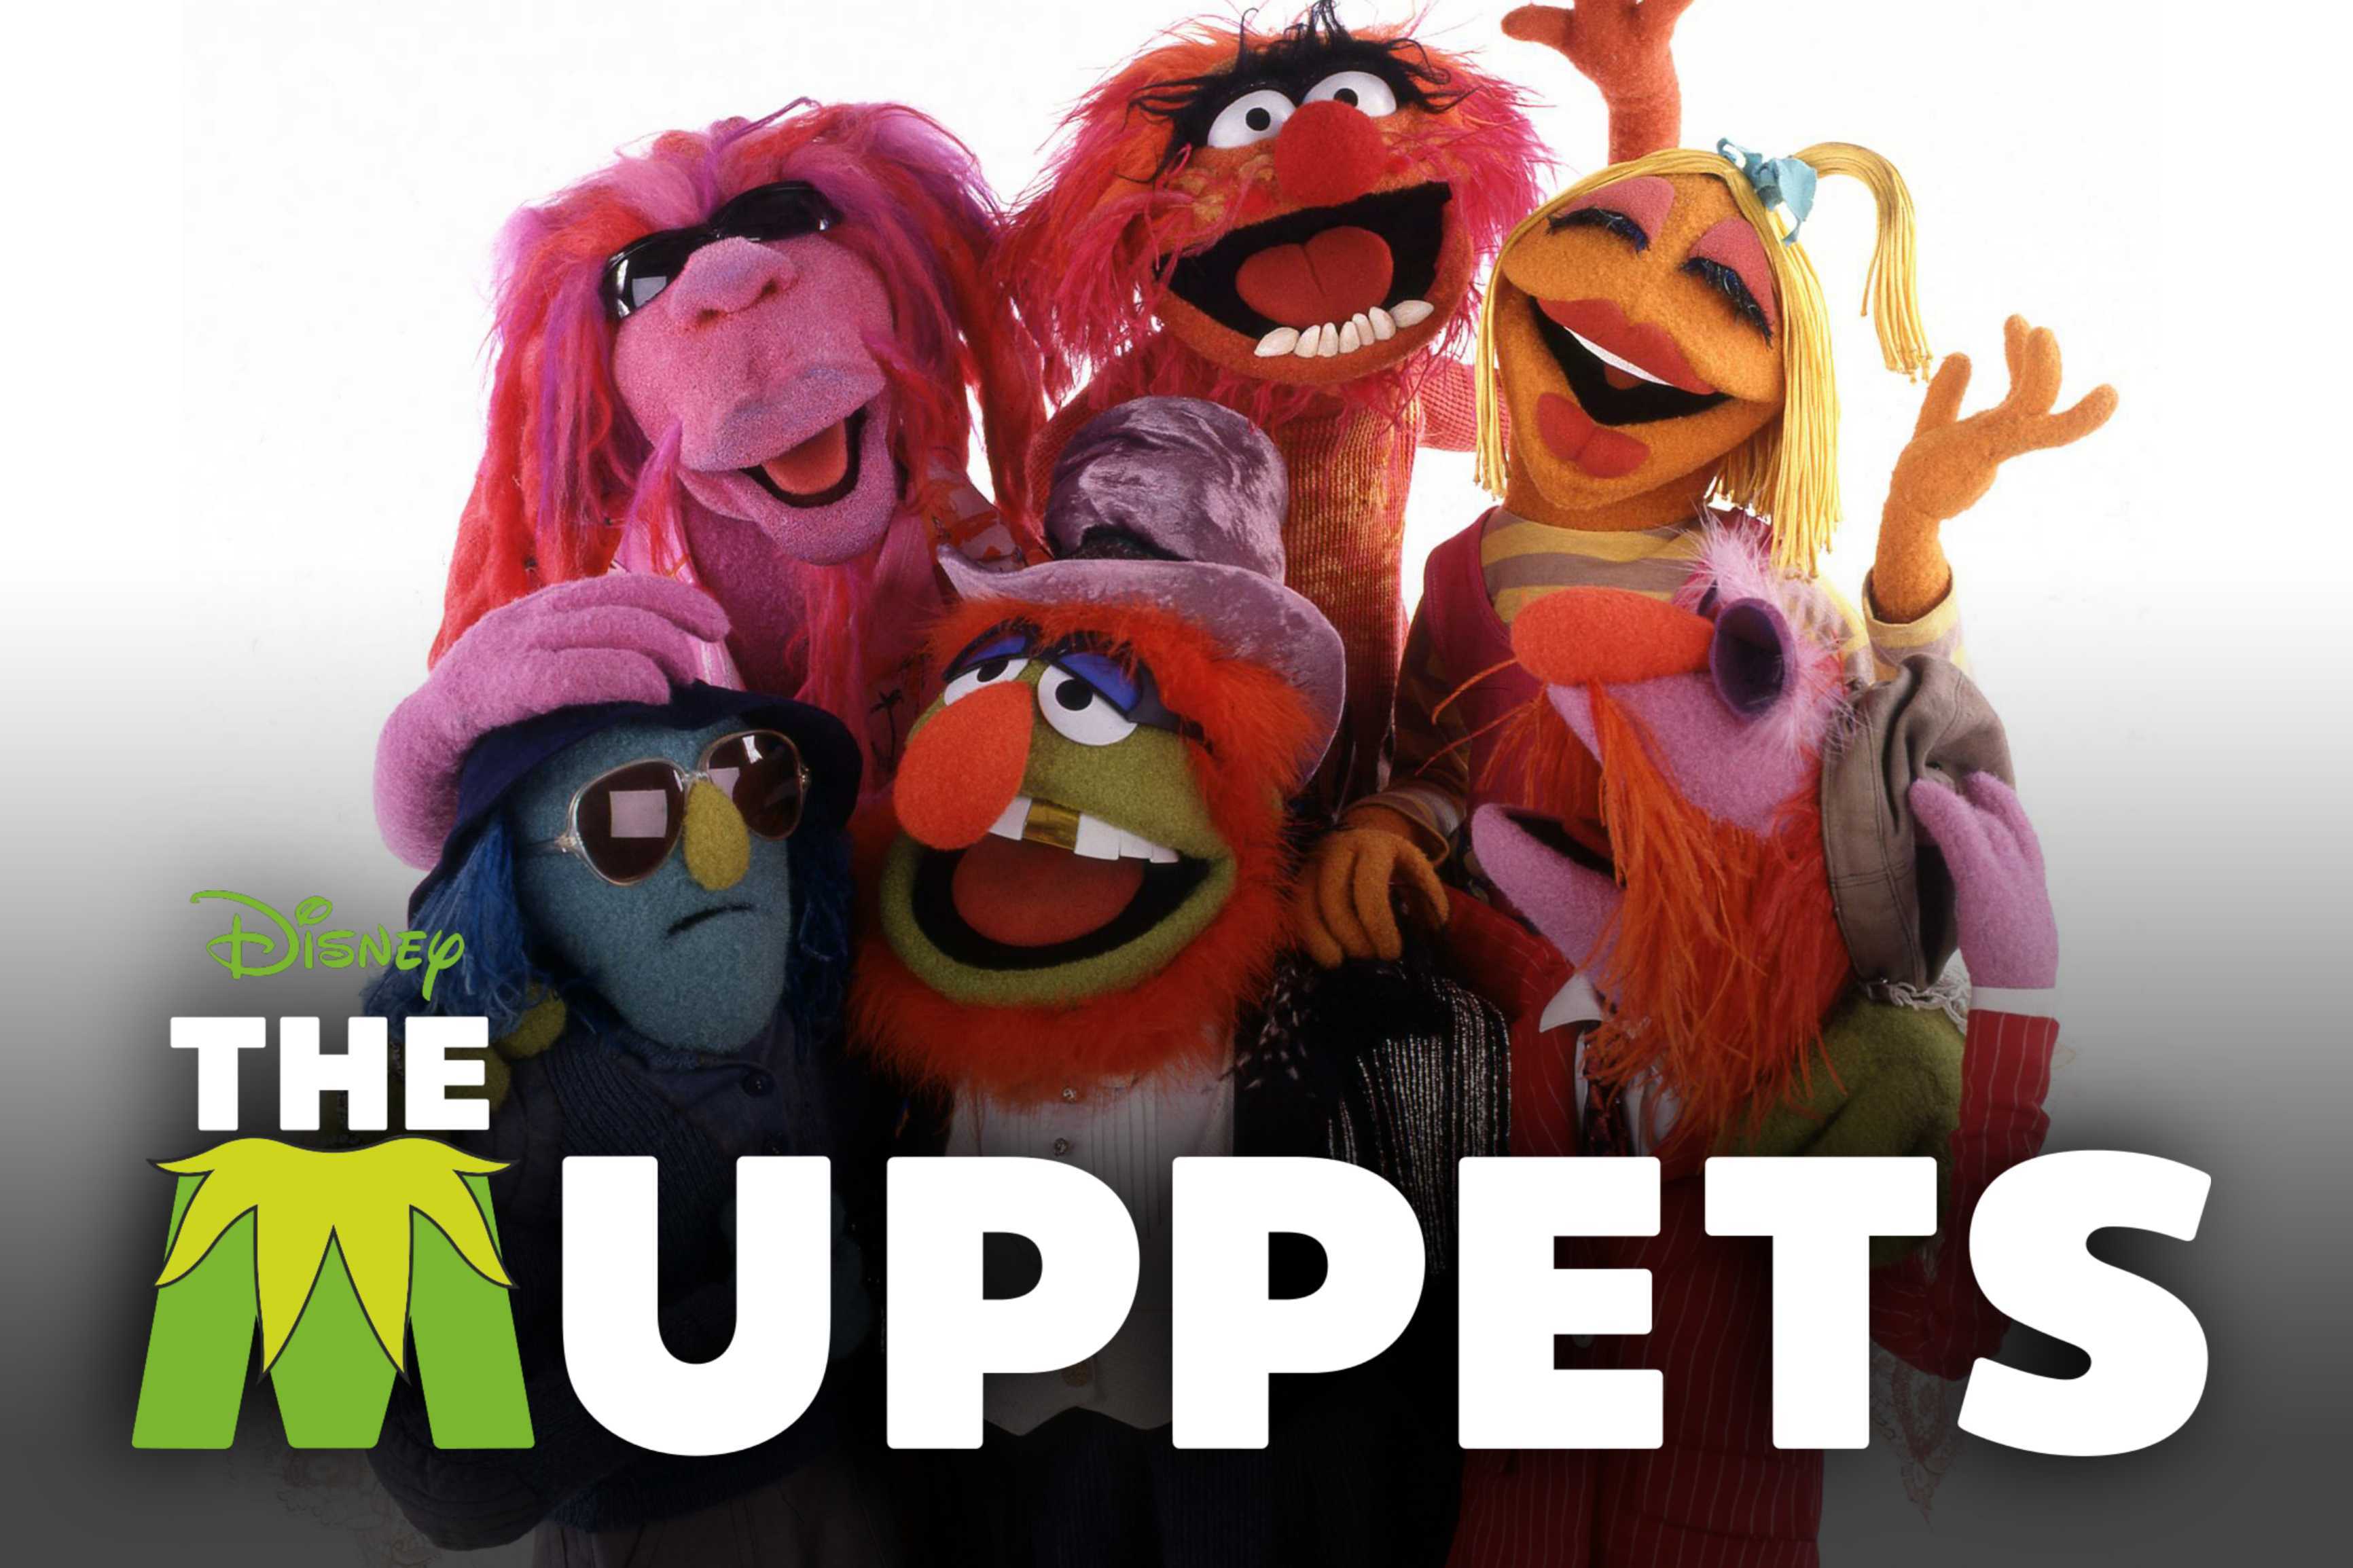 Exclusive: Additional Casting, Production Details Revealed For New ‘Muppets’ Disney+ Series